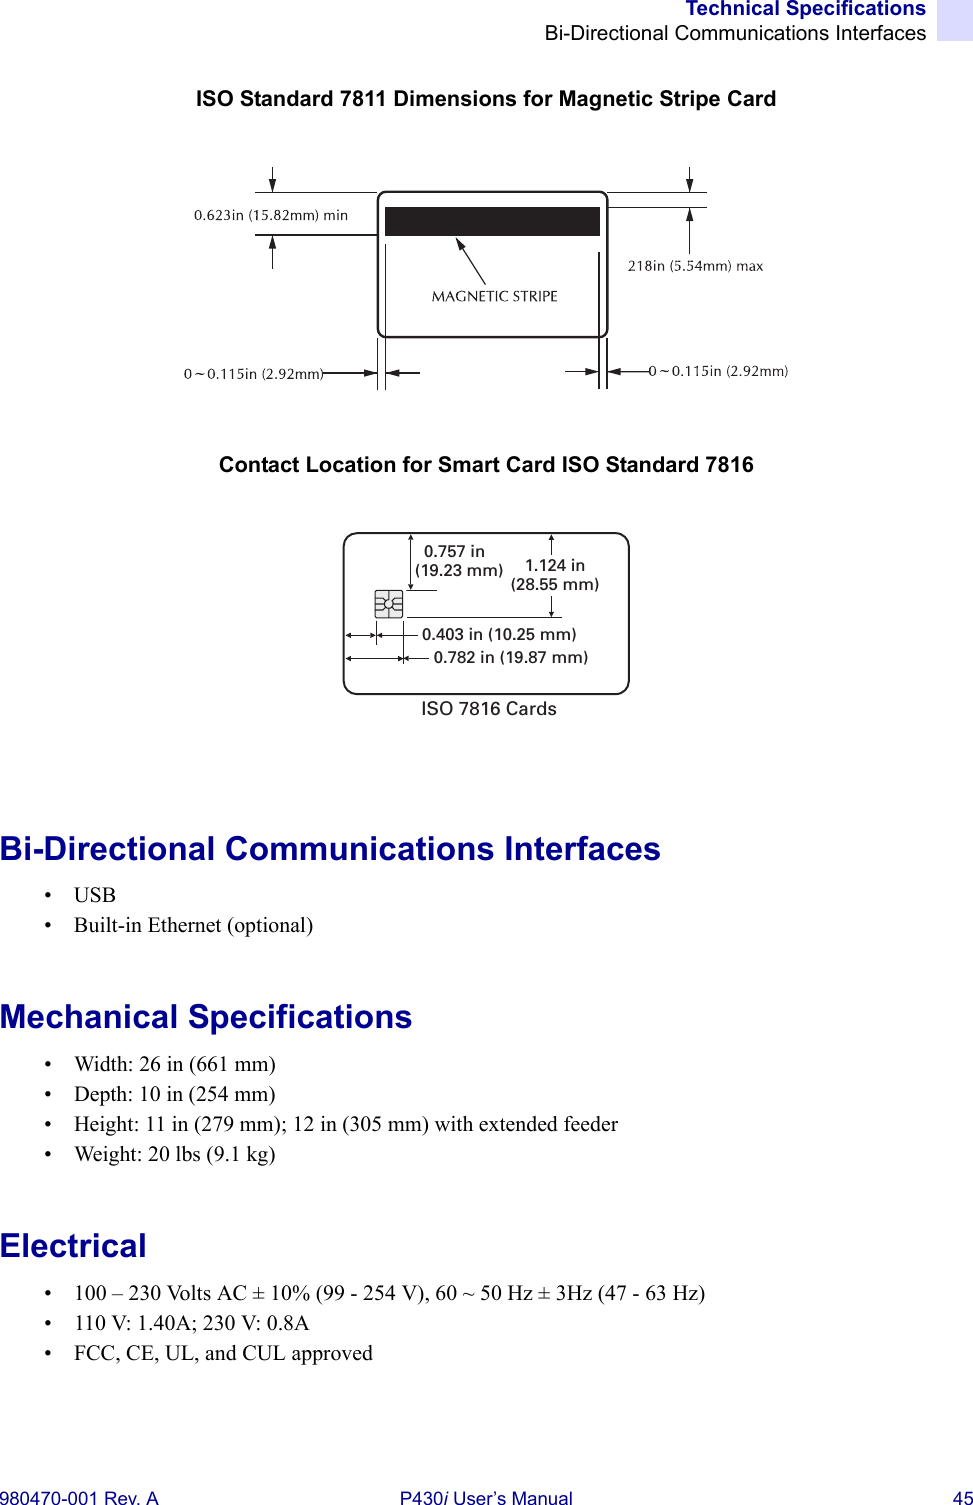 Technical SpecificationsBi-Directional Communications Interfaces980470-001 Rev. A P430i User’s Manual 45ISO Standard 7811 Dimensions for Magnetic Stripe CardContact Location for Smart Card ISO Standard 7816Bi-Directional Communications Interfaces•USB• Built-in Ethernet (optional)Mechanical Specifications• Width: 26 in (661 mm)• Depth: 10 in (254 mm)• Height: 11 in (279 mm); 12 in (305 mm) with extended feeder• Weight: 20 lbs (9.1 kg)Electrical• 100 – 230 Volts AC ± 10% (99 - 254 V), 60 ~ 50 Hz ± 3Hz (47 - 63 Hz)• 110 V: 1.40A; 230 V: 0.8A• FCC, CE, UL, and CUL approved0.403 in (10.25 mm)0.782 in (19.87 mm)0.757 in(19.23 mm) 1.124 in(28.55 mm)ISO 7816 Cards